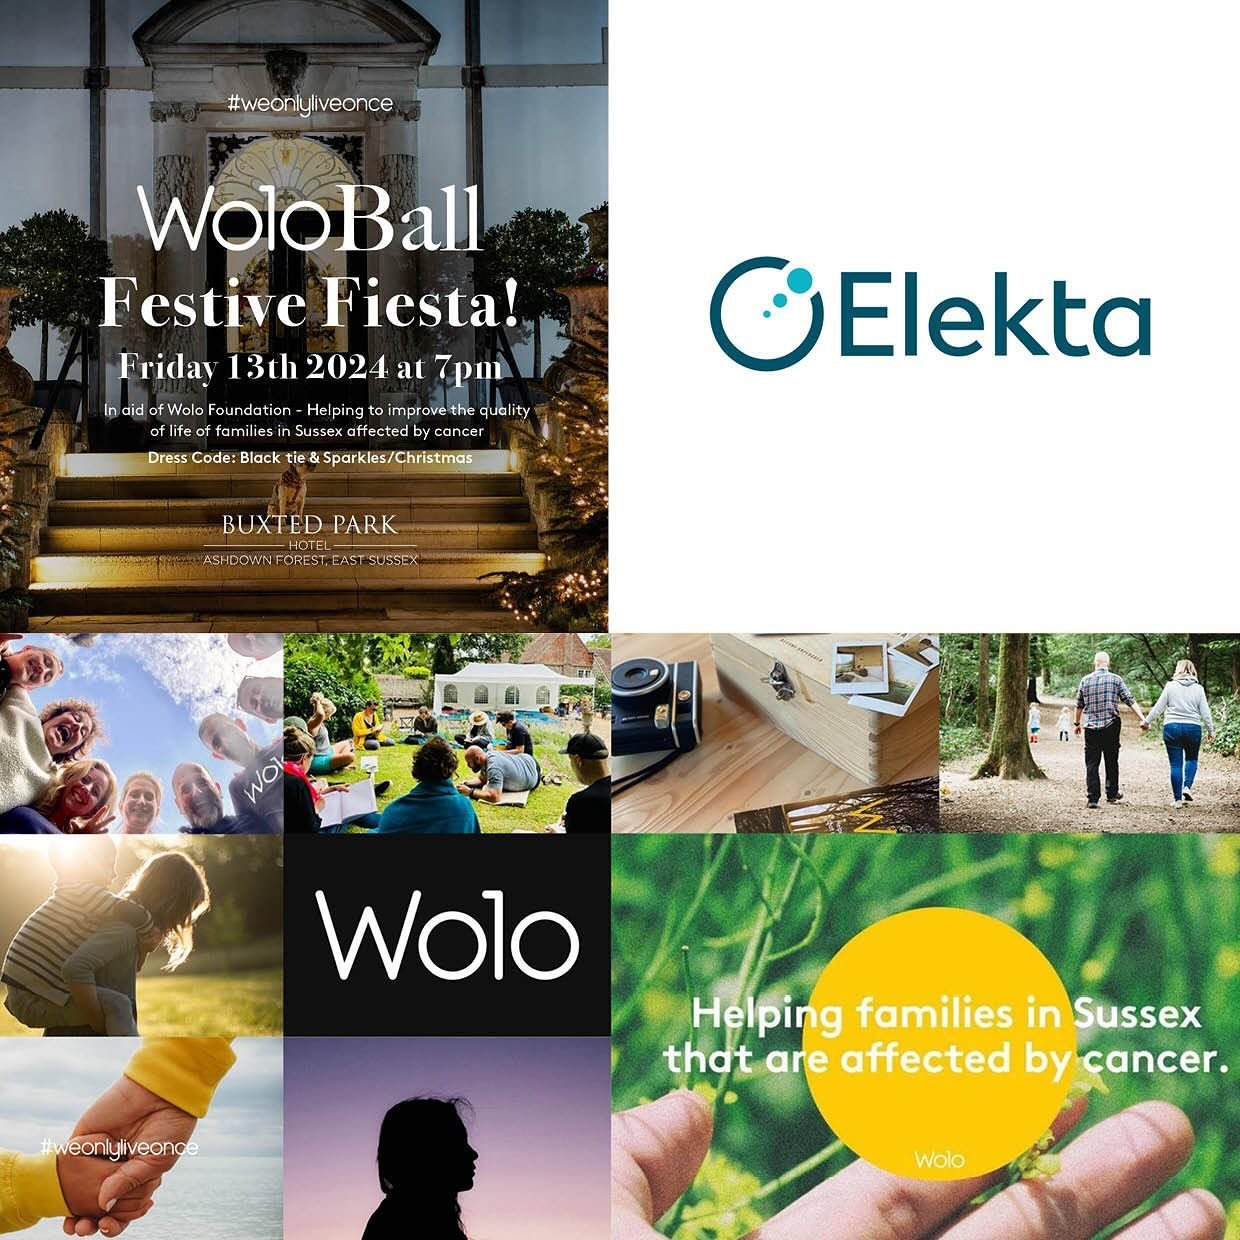 Just over 6 months to the big event 13th December is the WoloBall 2024

A massive thank you to one of our sponsors, @elekta_ - Your support is much appreciated.

Come and join @wolofoundation for a magical Christmas WoloBall - Festive Fiesta as we ta